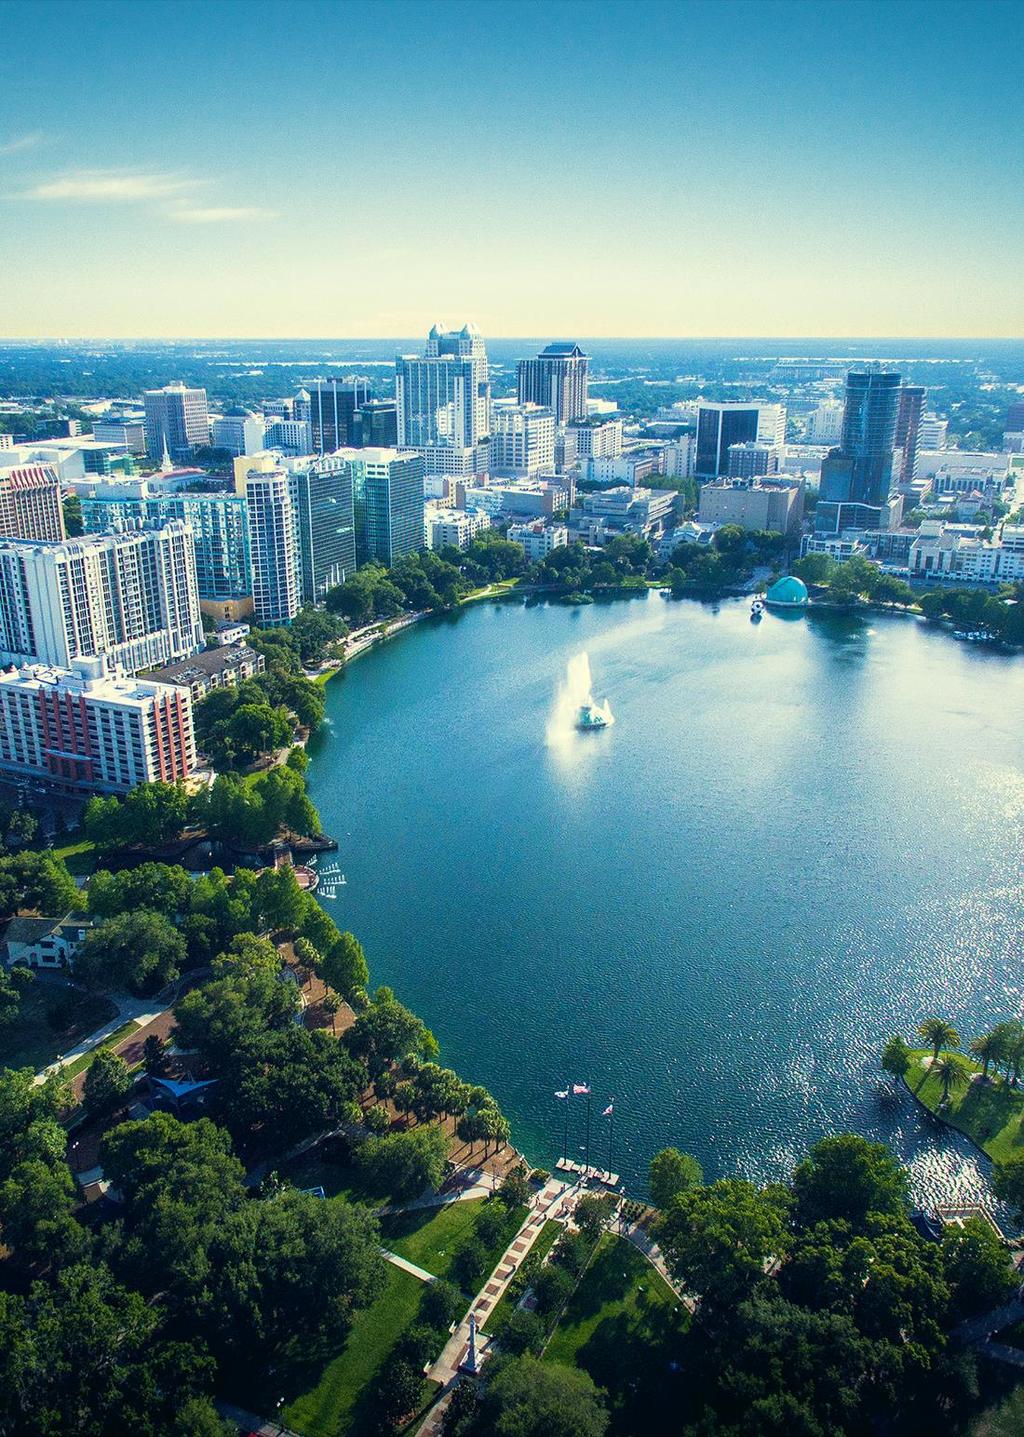 ORLANDO OVERVIEW The Orlando metro encompasses four counties: Osceola, Orange, Seminole and Lake, covering more than,000 square miles in central Florida.